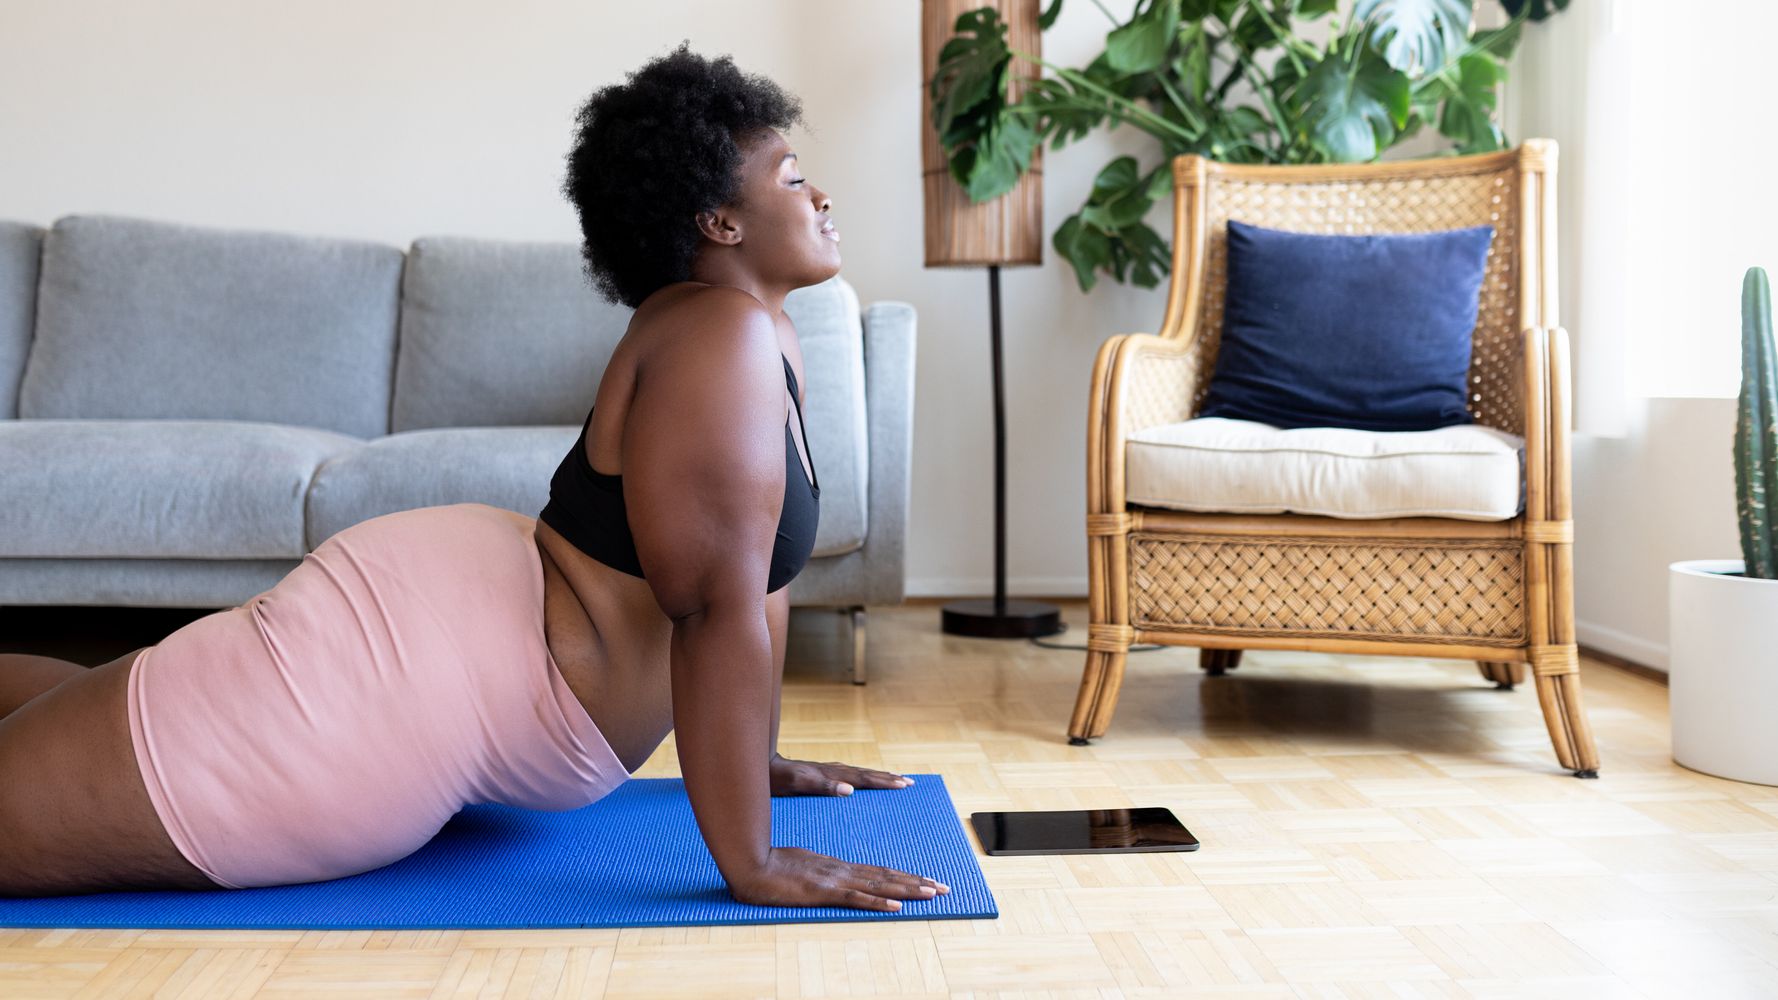 11 Home Workouts To Jazz Up Your Exercise Routine, From HIIT To Yoga